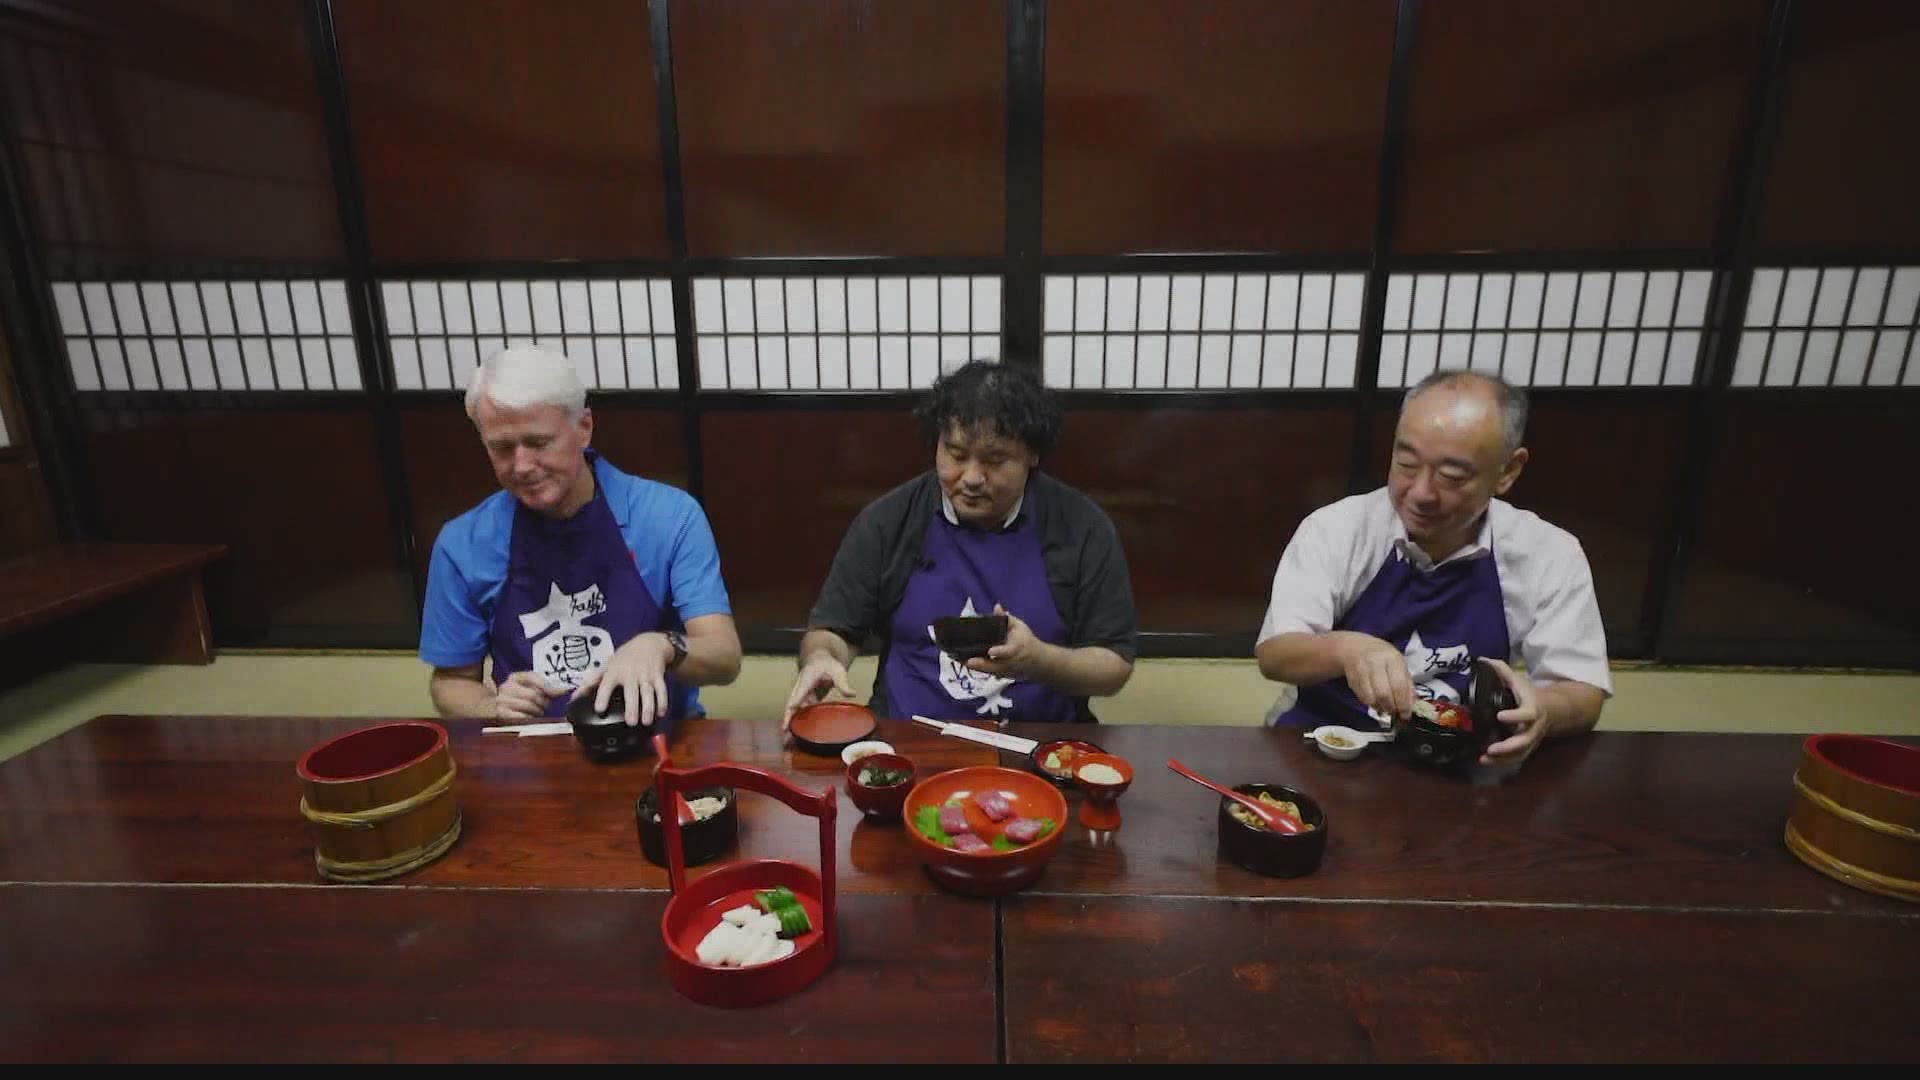 The food in Japan is amazing. The sushi is great... and so are the noodles! Scott Swan visited a soba restaurant and dined with the owner.